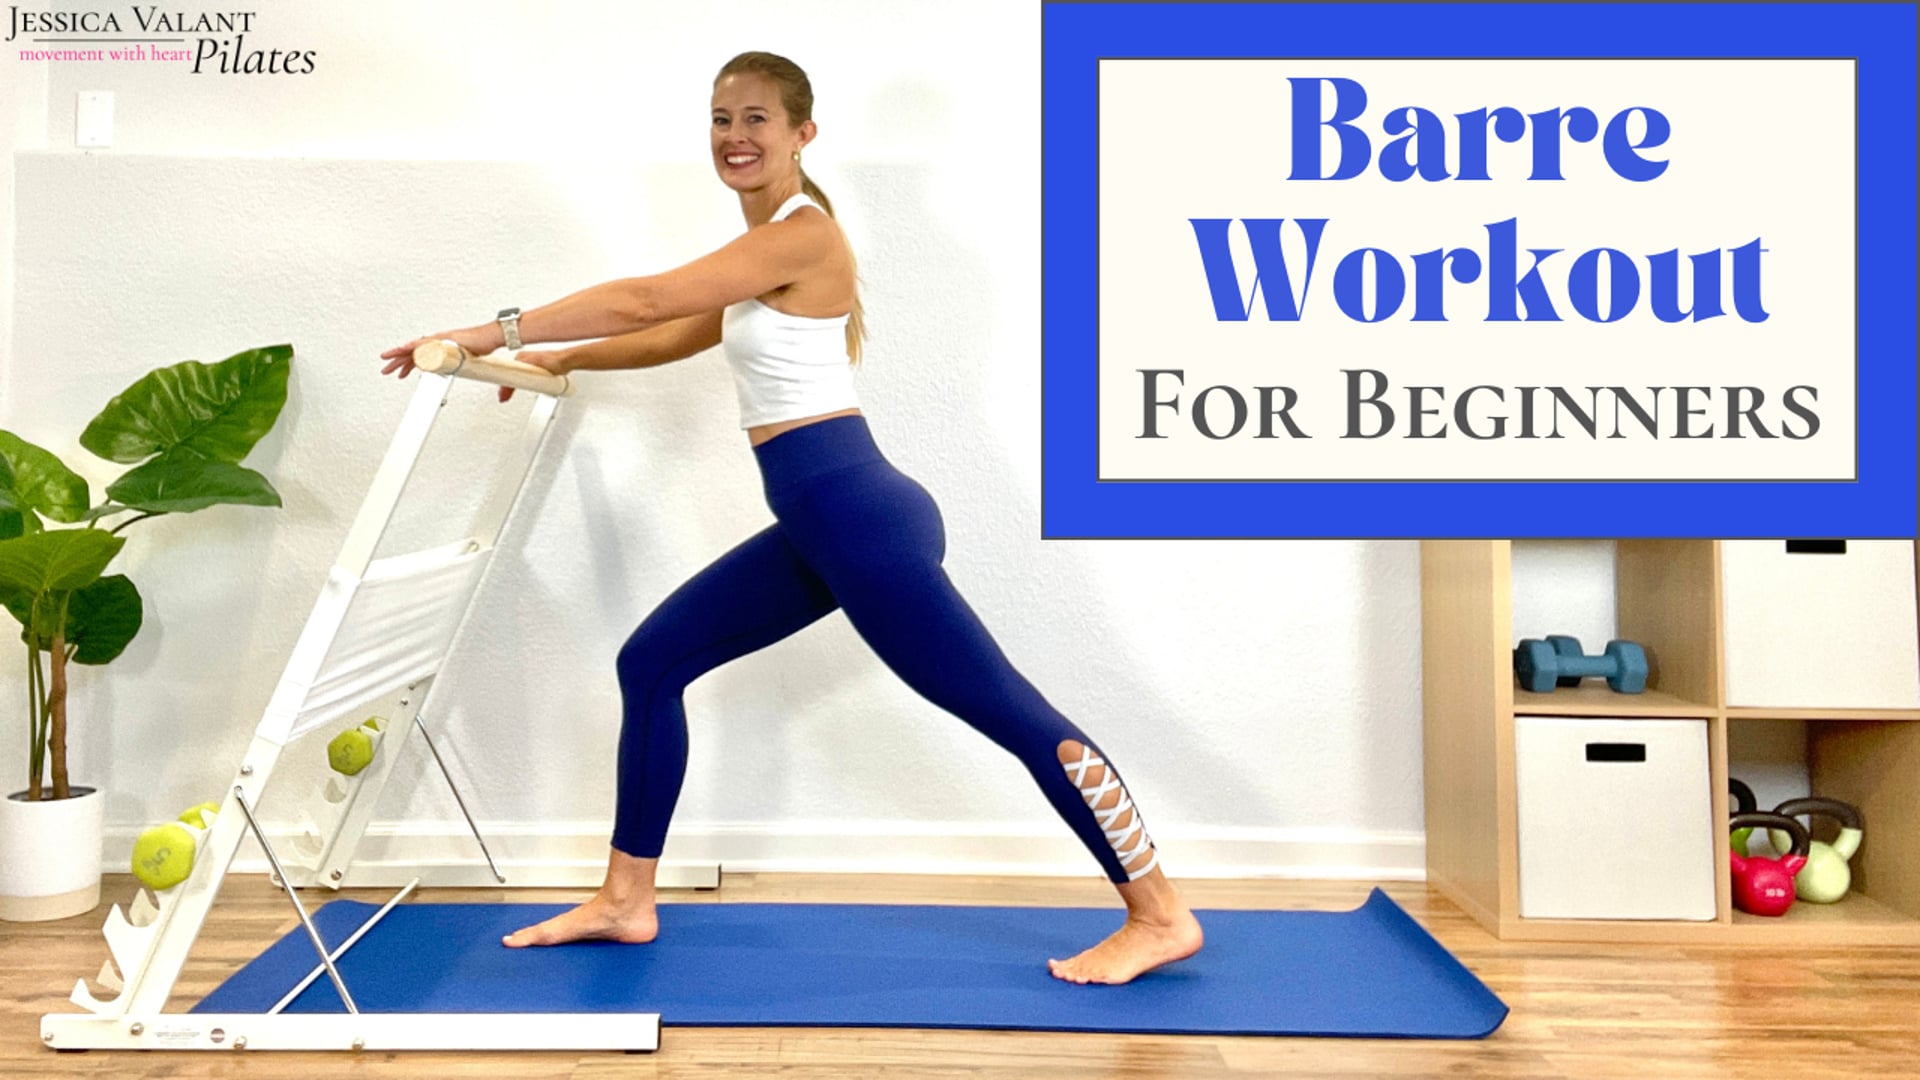 Barre Workout for Beginners - Jessica Valant Pilates